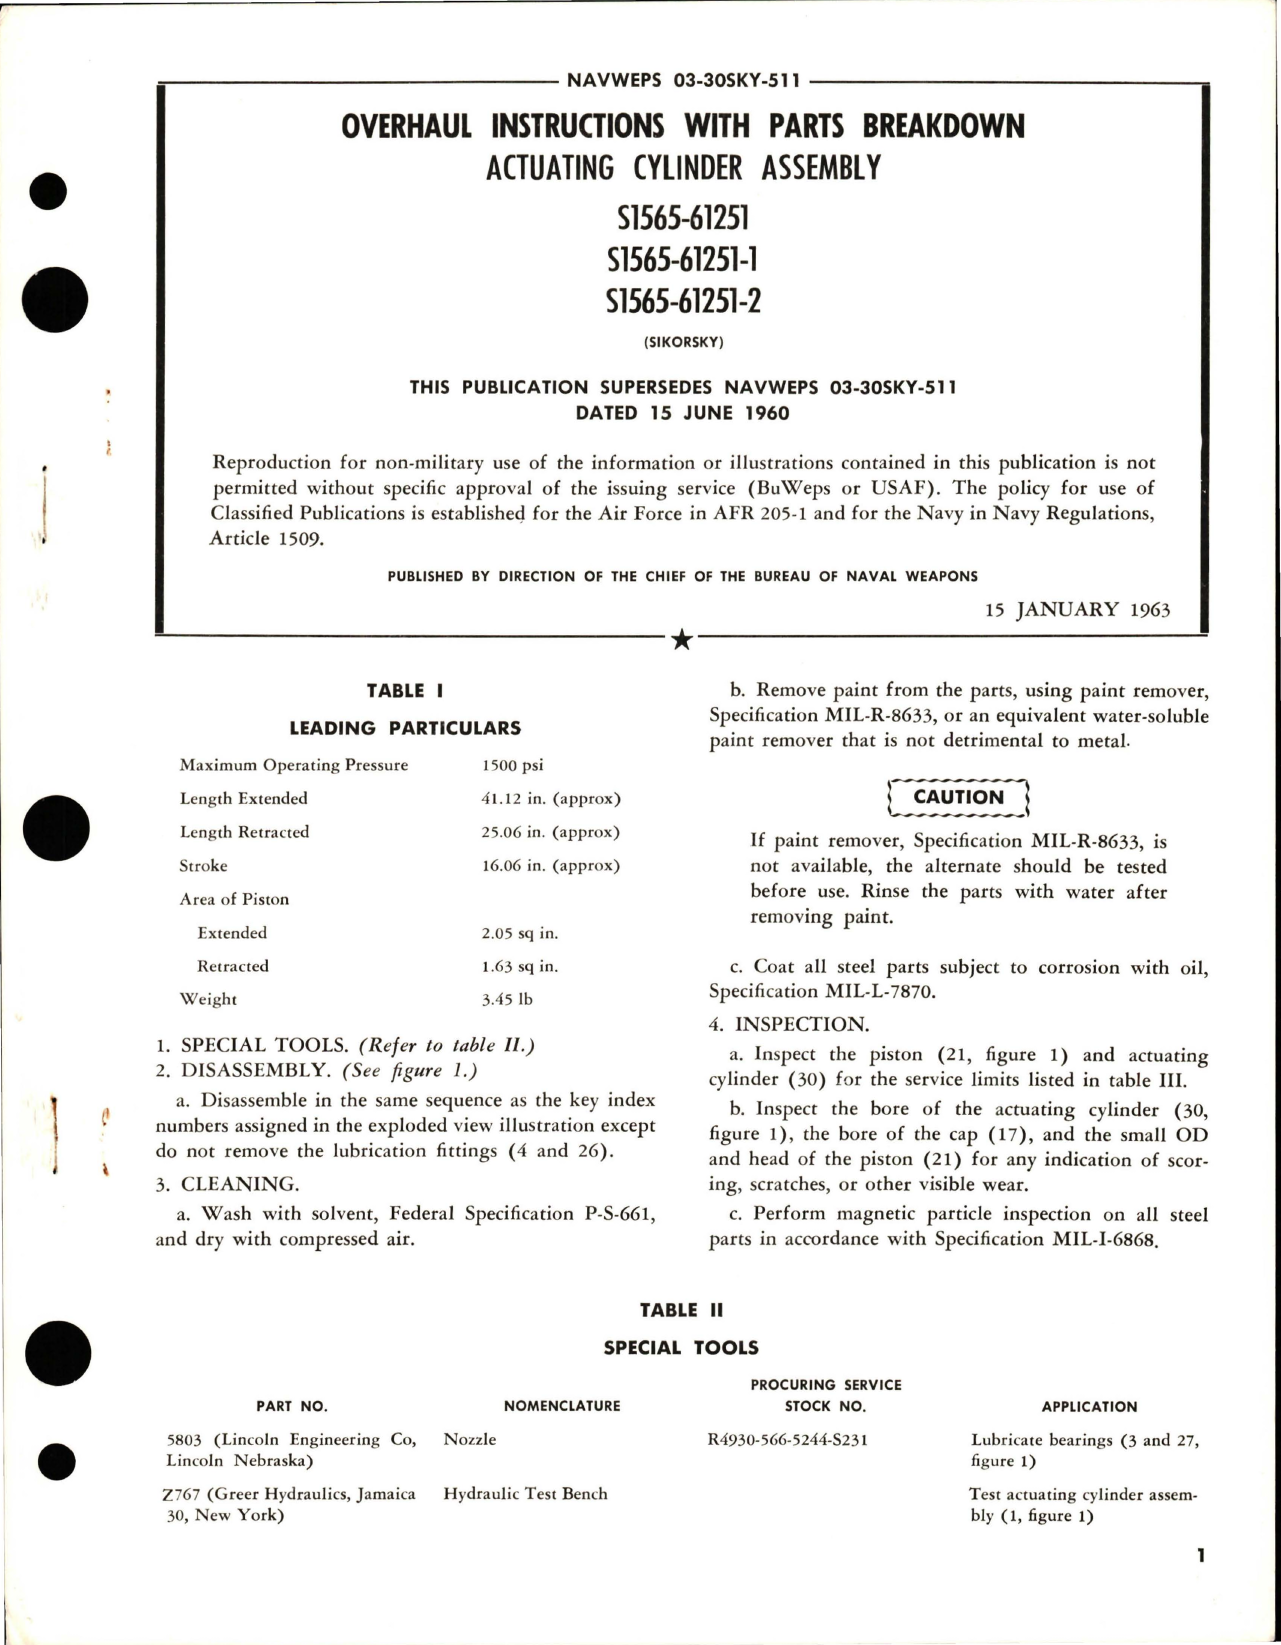 Sample page 1 from AirCorps Library document: Overhaul Instructions with Parts Breakdown for Actuating Cylinder Assembly - S1565-61251, S15656-61251-1, and S1565-61251-2